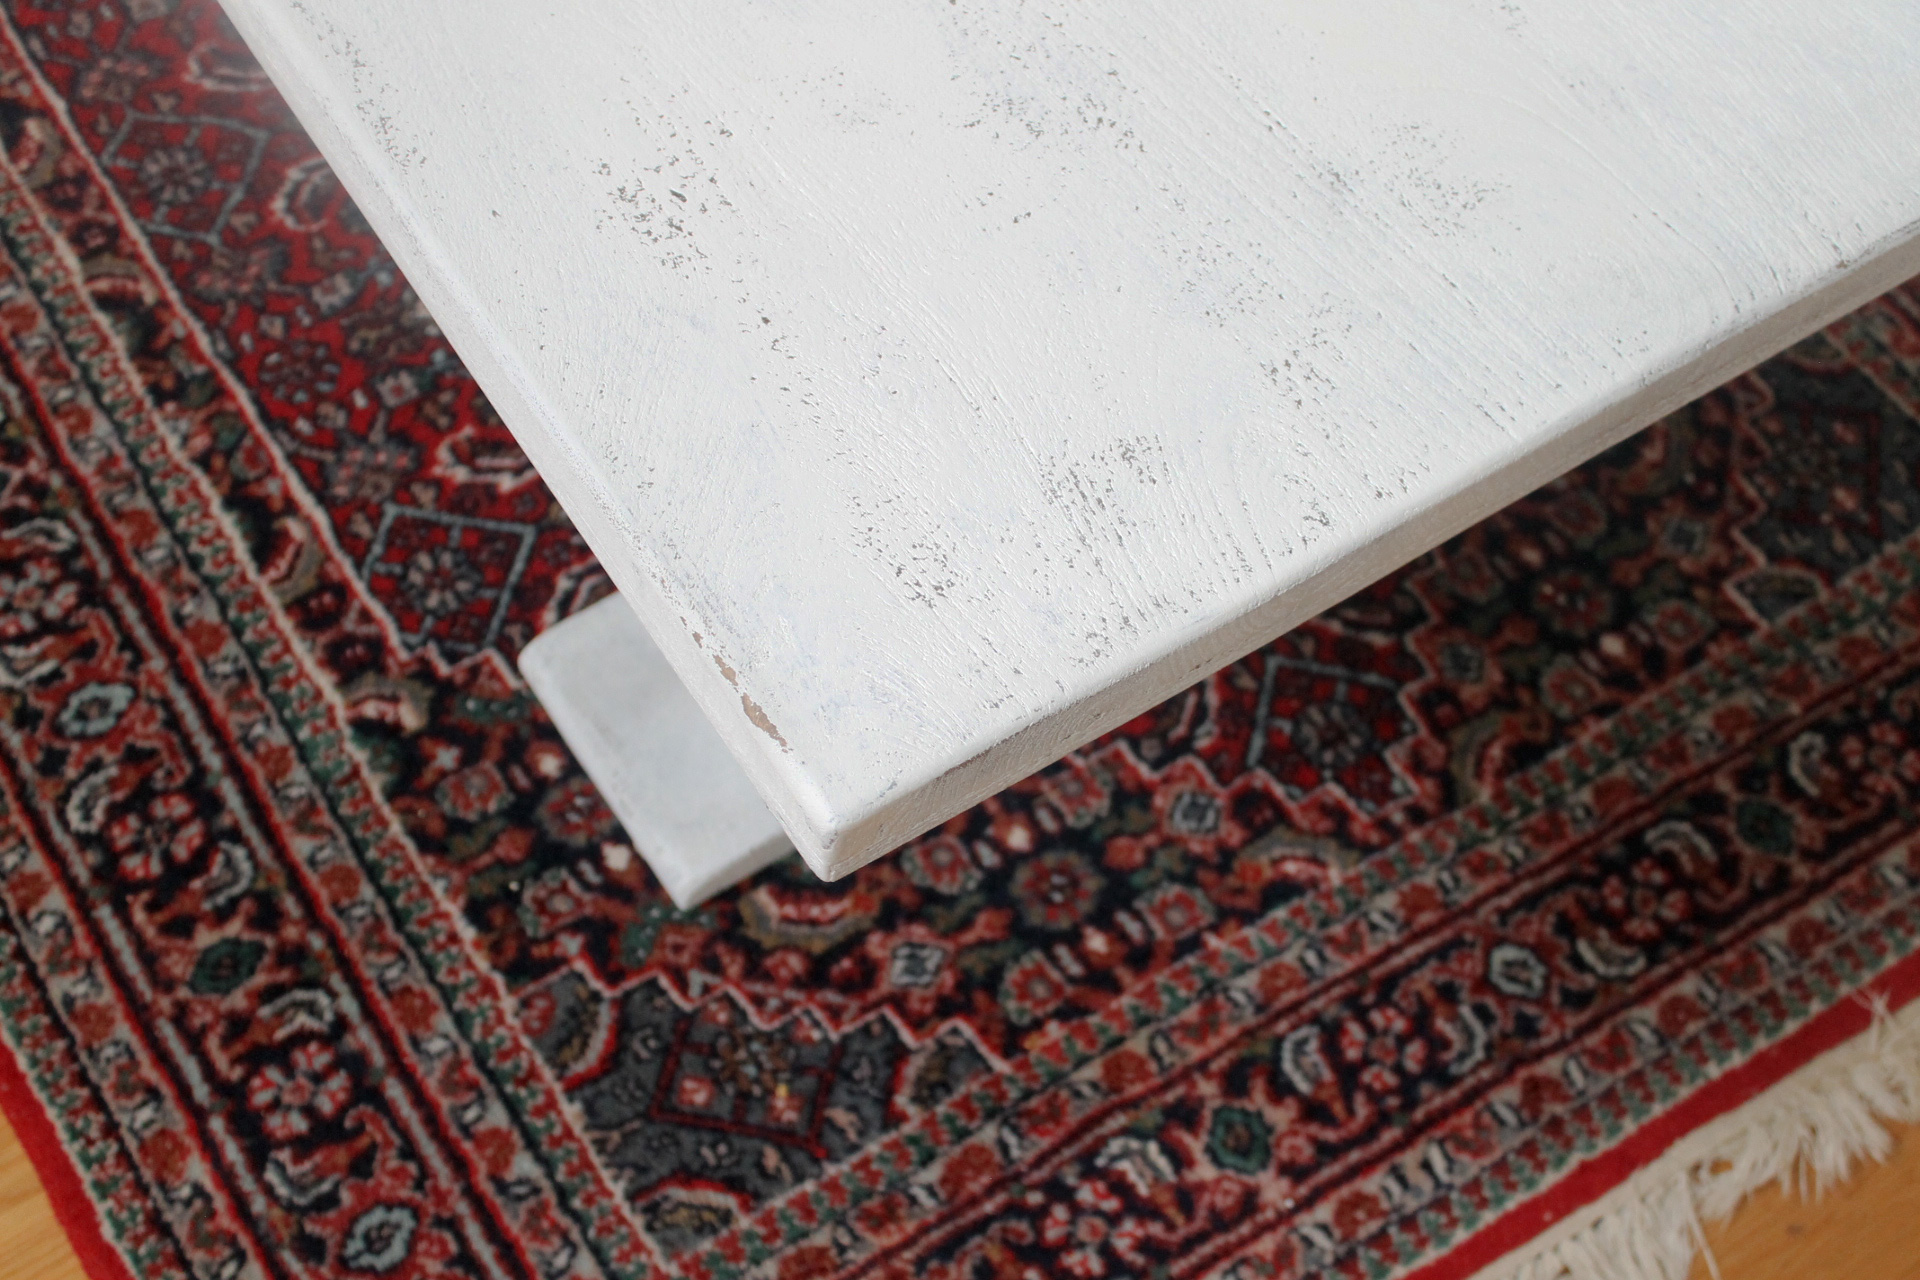 How to DIY a Distressed Shabby Chic Coffee Table (the Easy Way!)